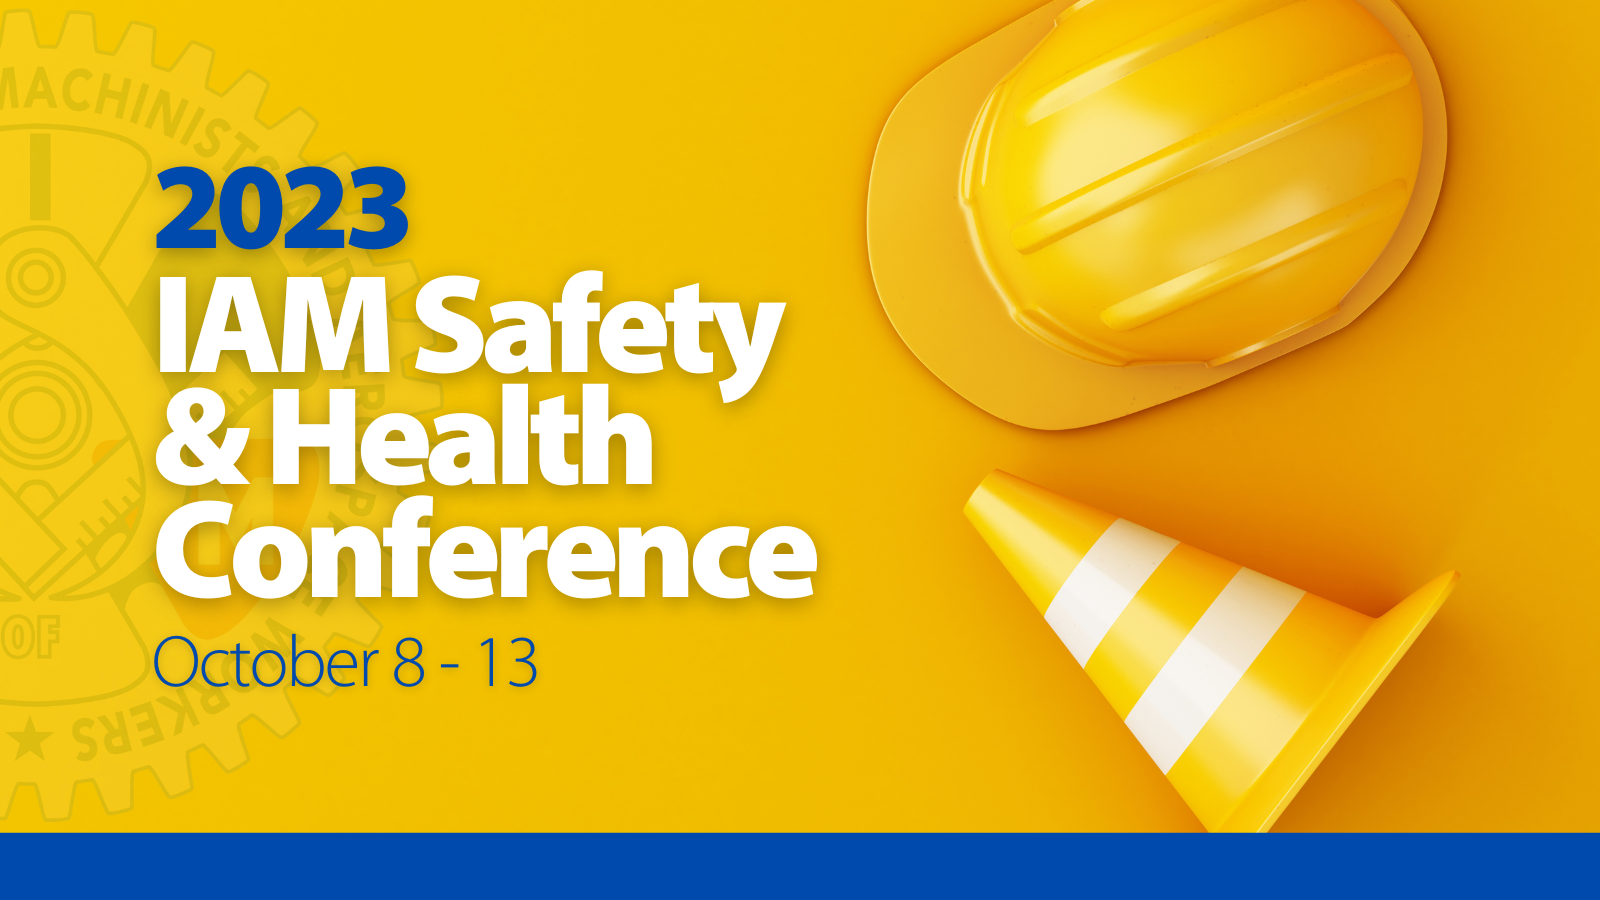 Registration is Now Open for the 2023 IAM Safety and Health Conference